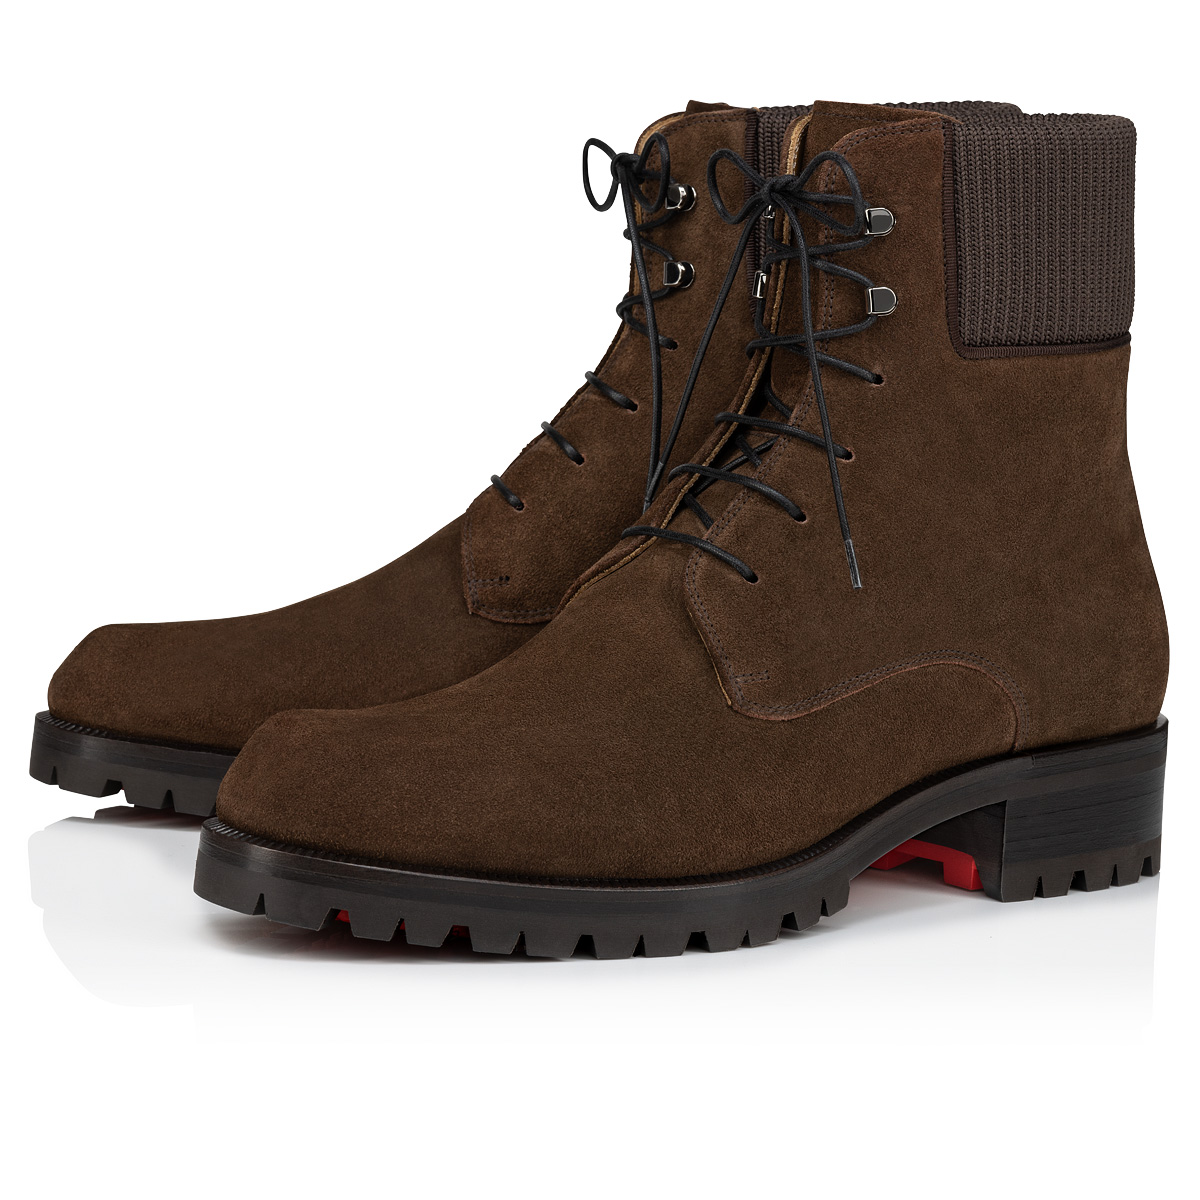 Christian Louboutin Men's Trapman Red Sole Suede Combat Boots